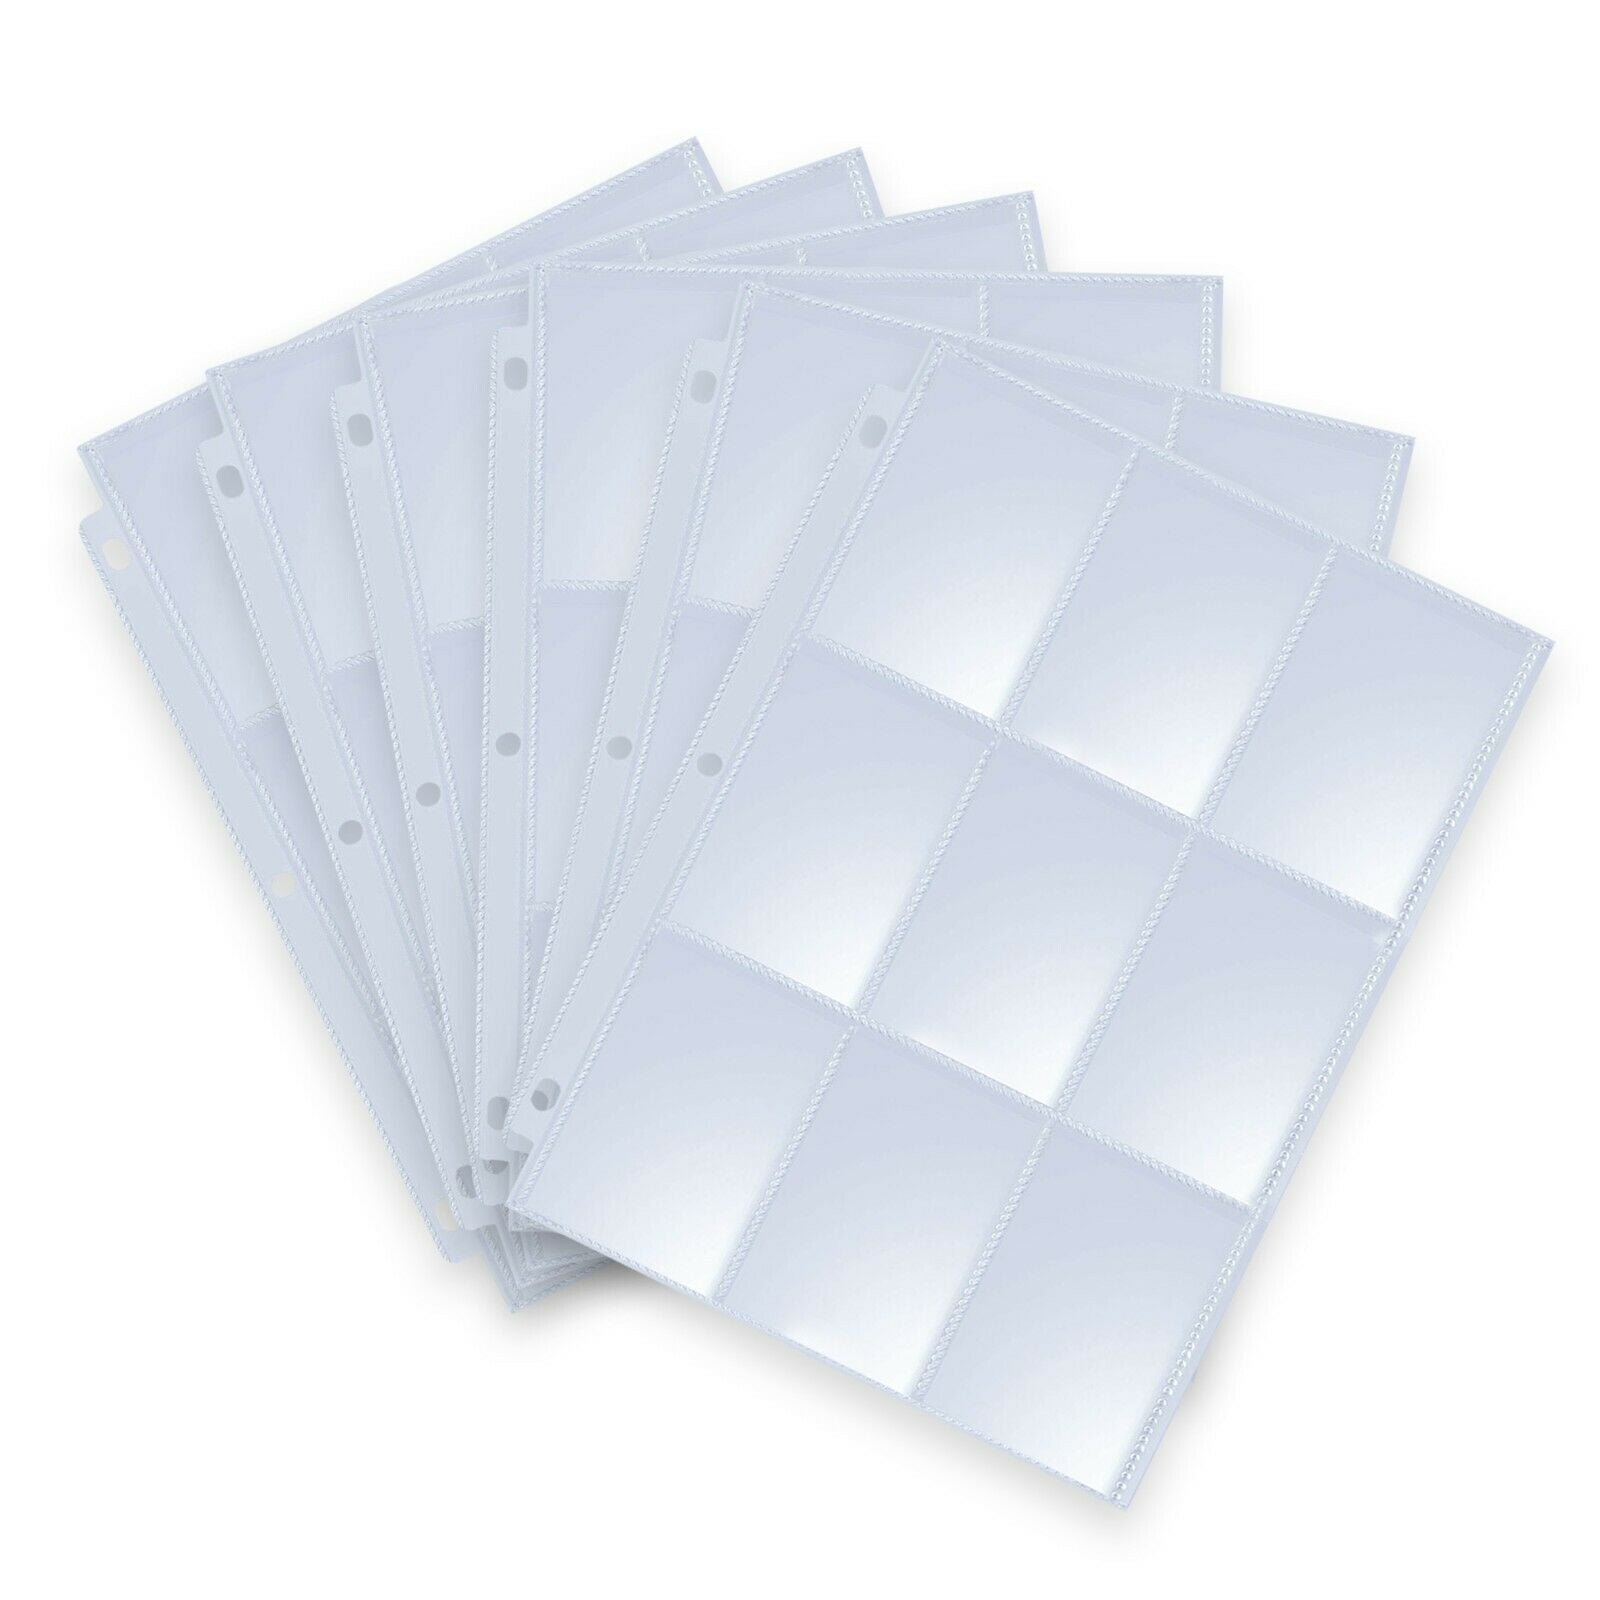 30 Clear Heavyweight Trading Card Holders, 9 Pocket Card Holder